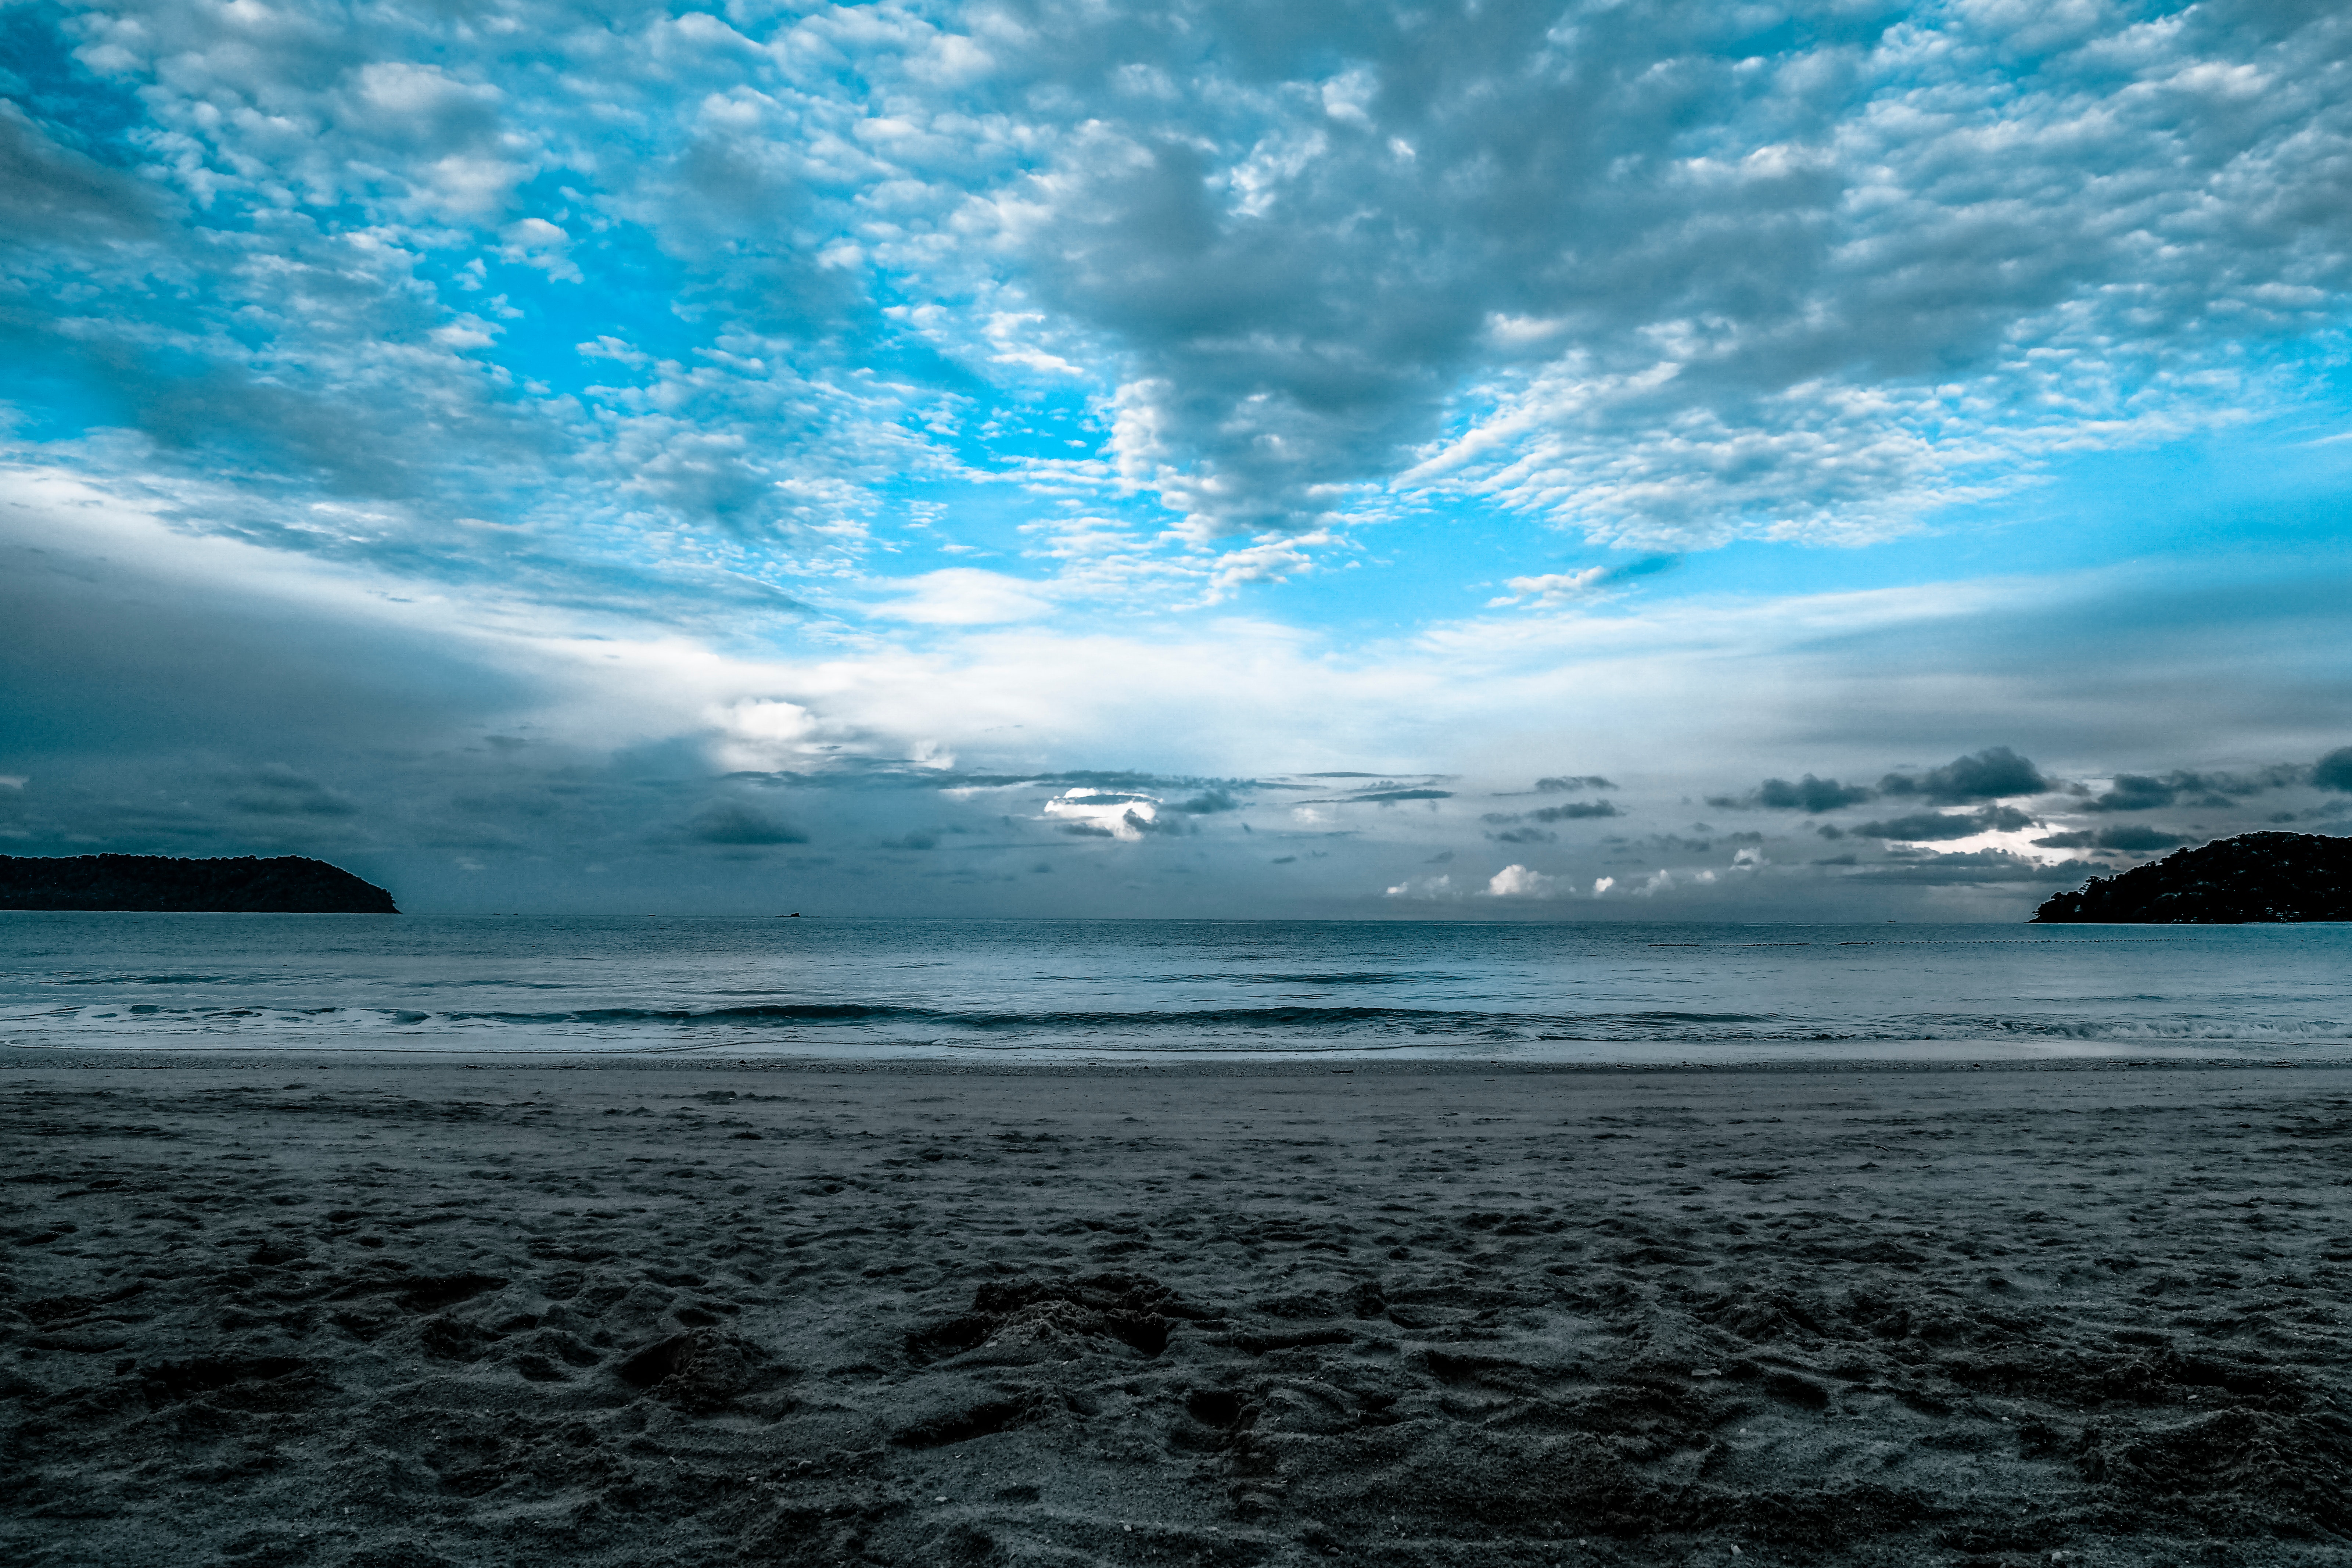 Gray Sand on Sea Shore Under Cloudy Sky during Daytime, Beach, Cloud, Clouds, Dawn, HQ Photo